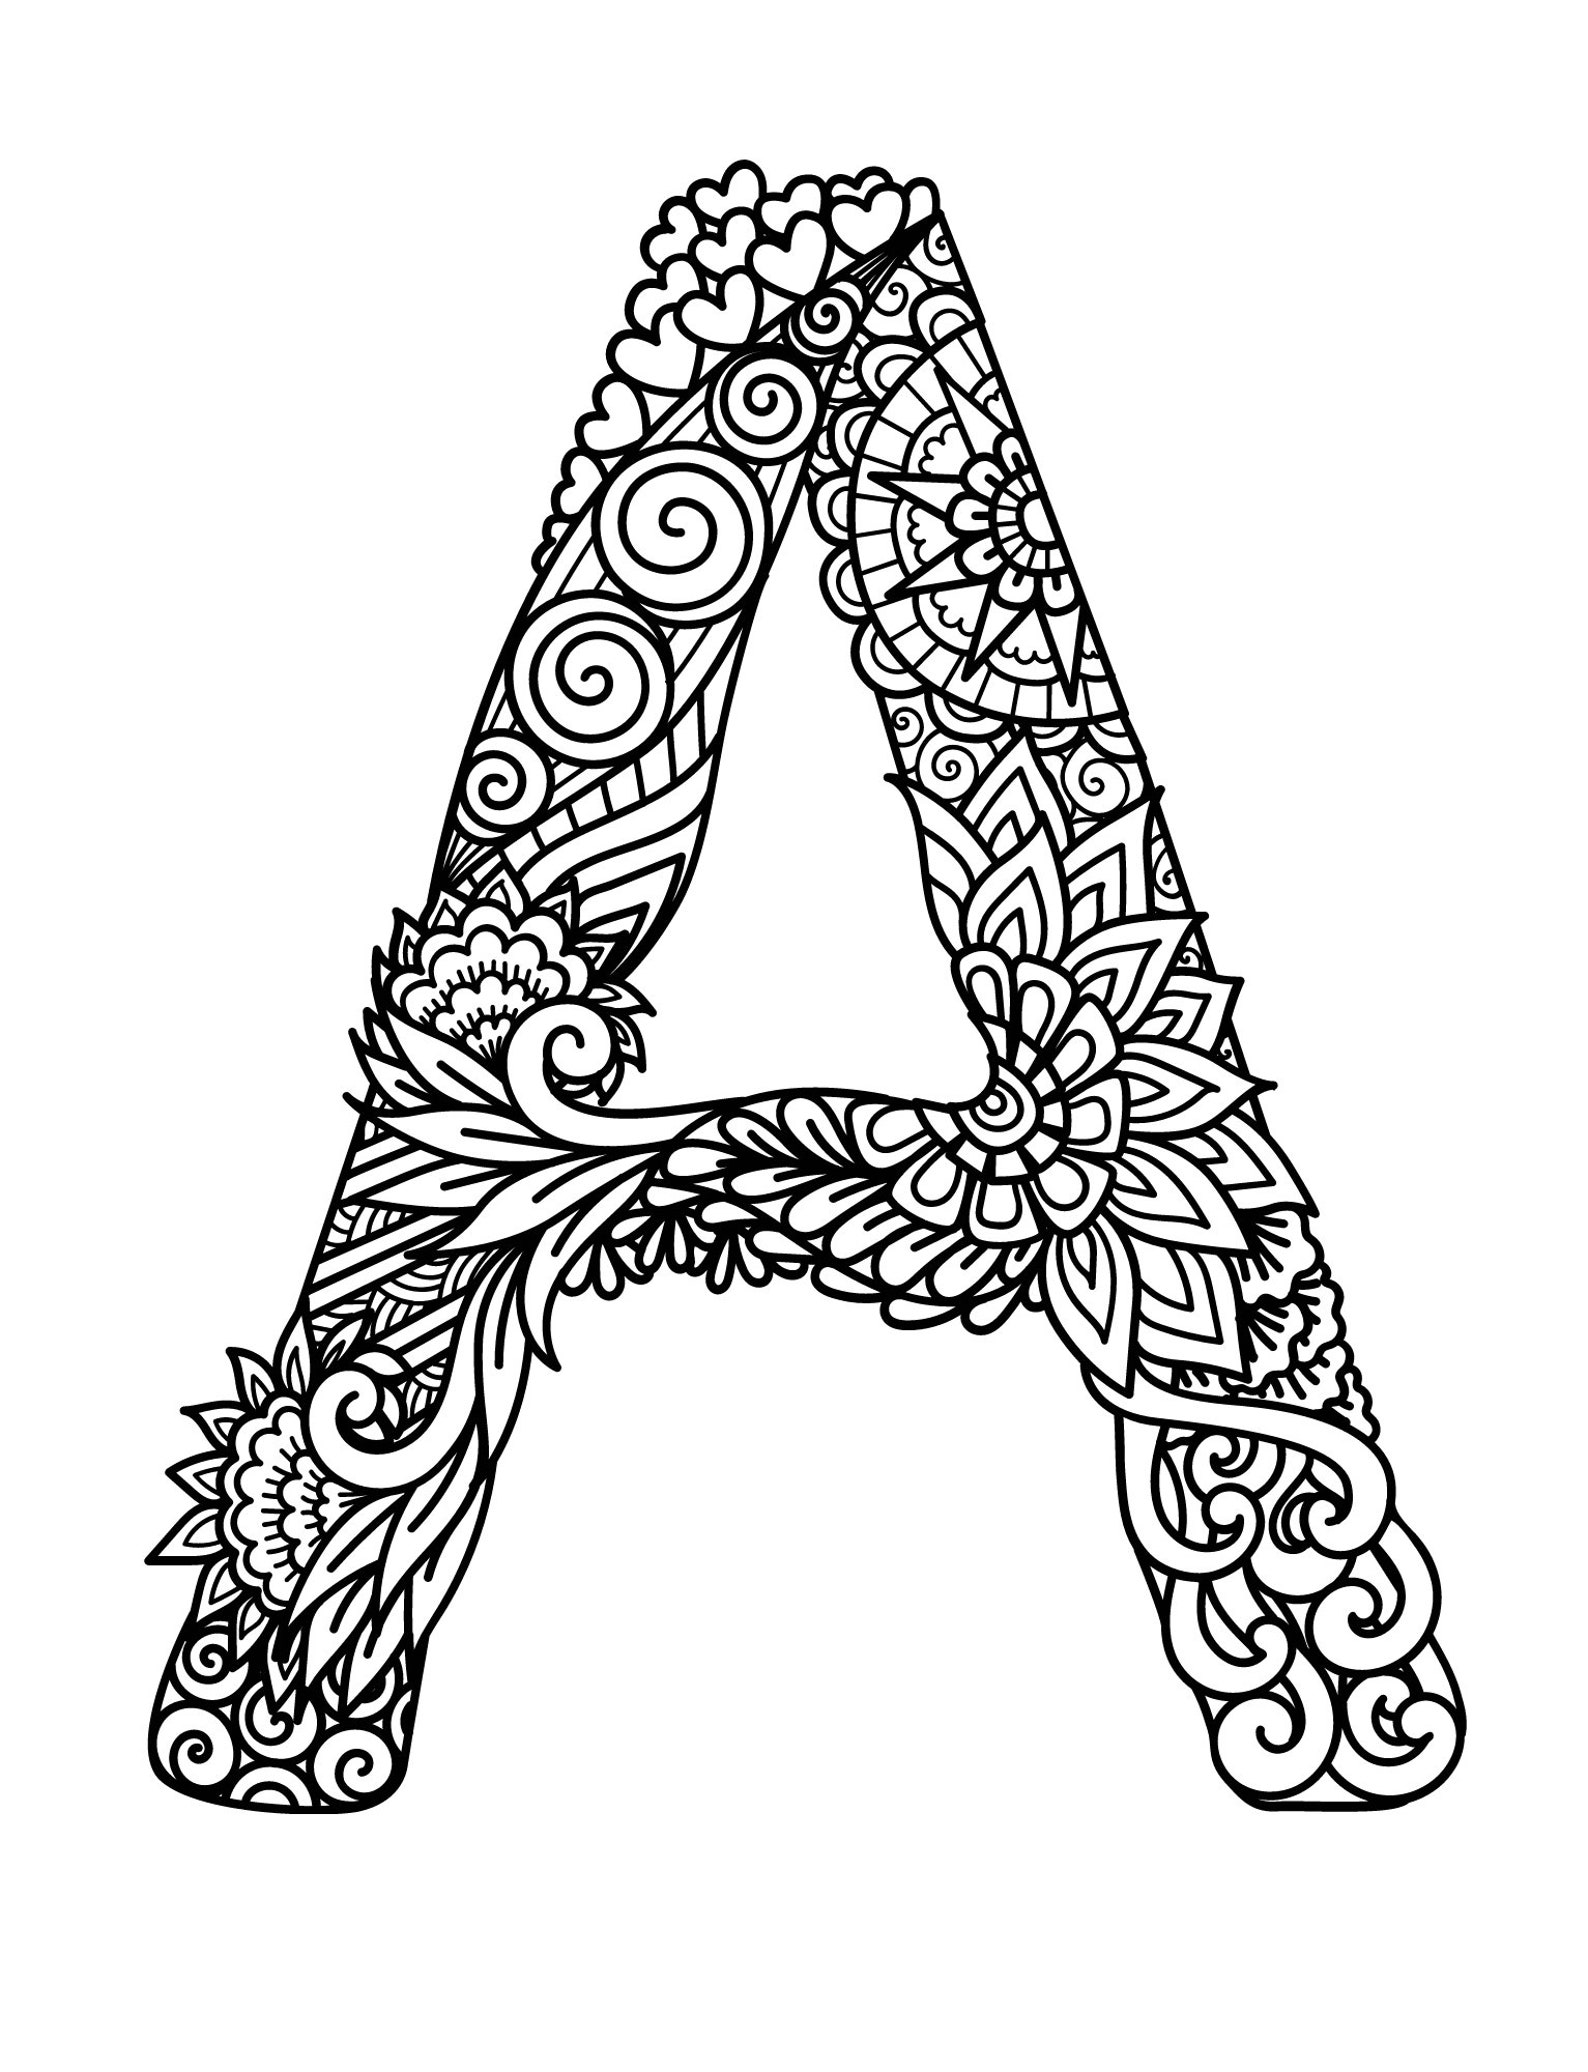 Mandala Alphabet Coloring Pages Alphabet for Kids to Color - Etsy Canada